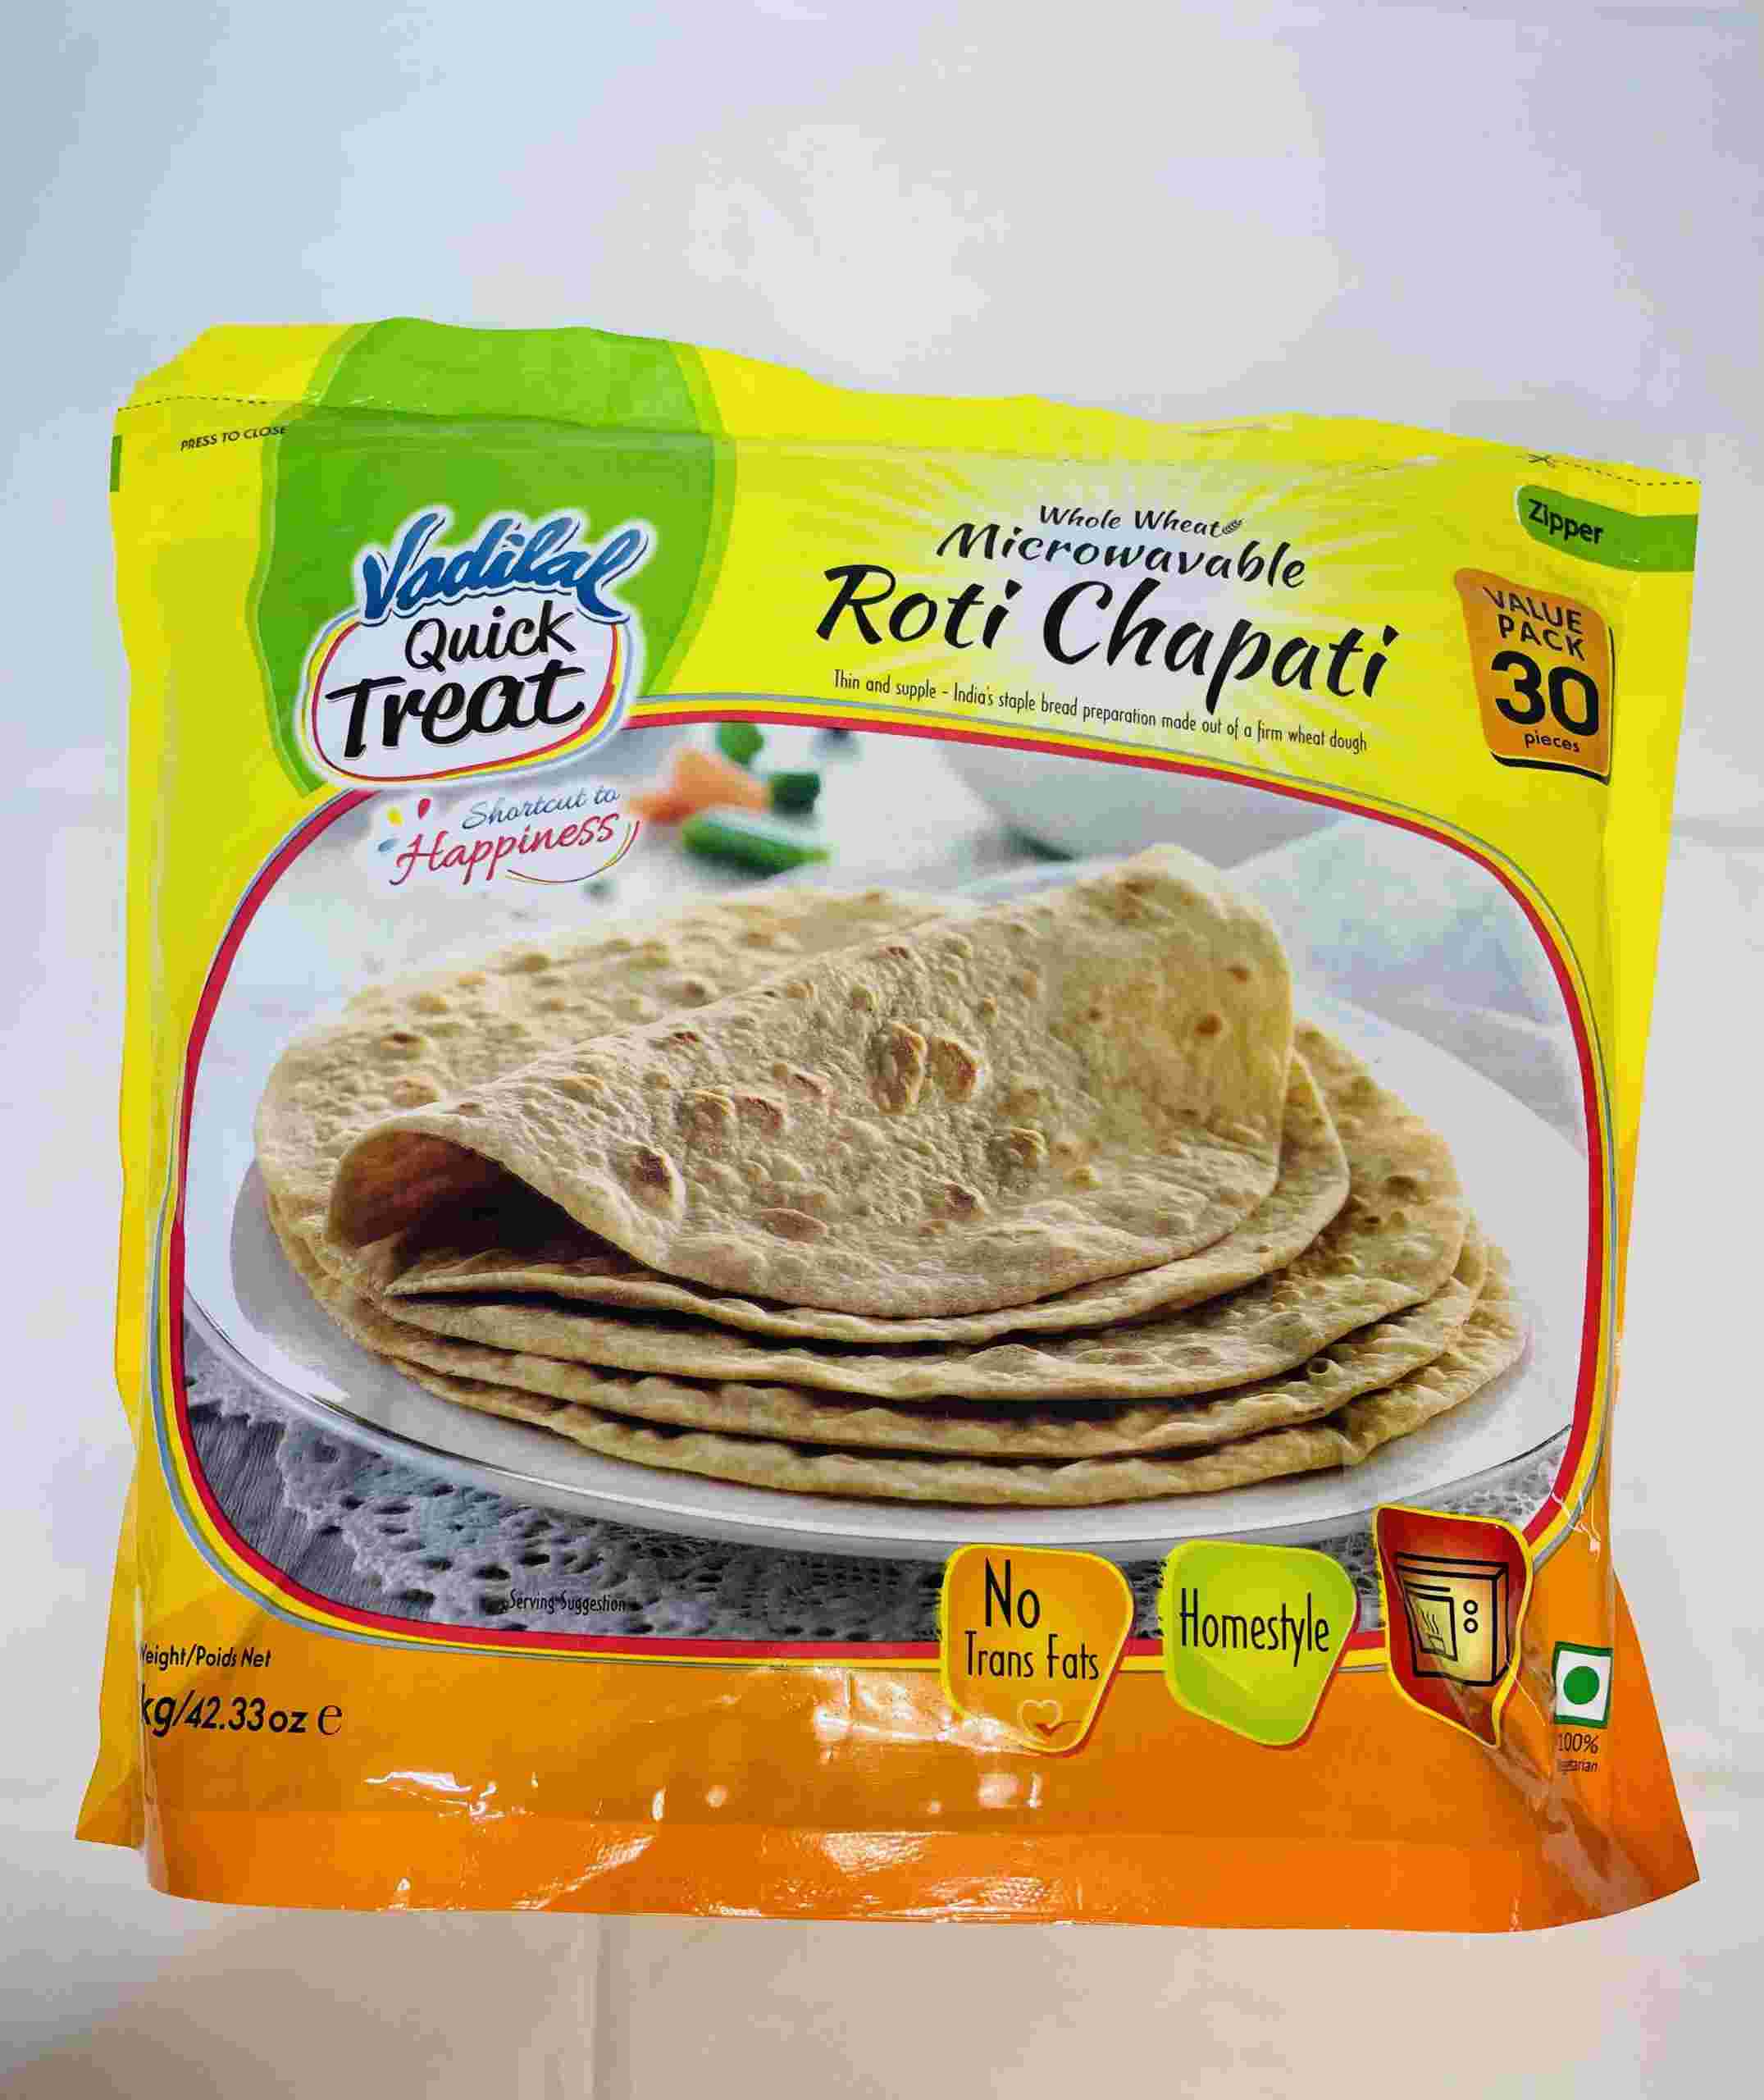 Vadilal Whole Wheat Microwavable Roti 30 Pices